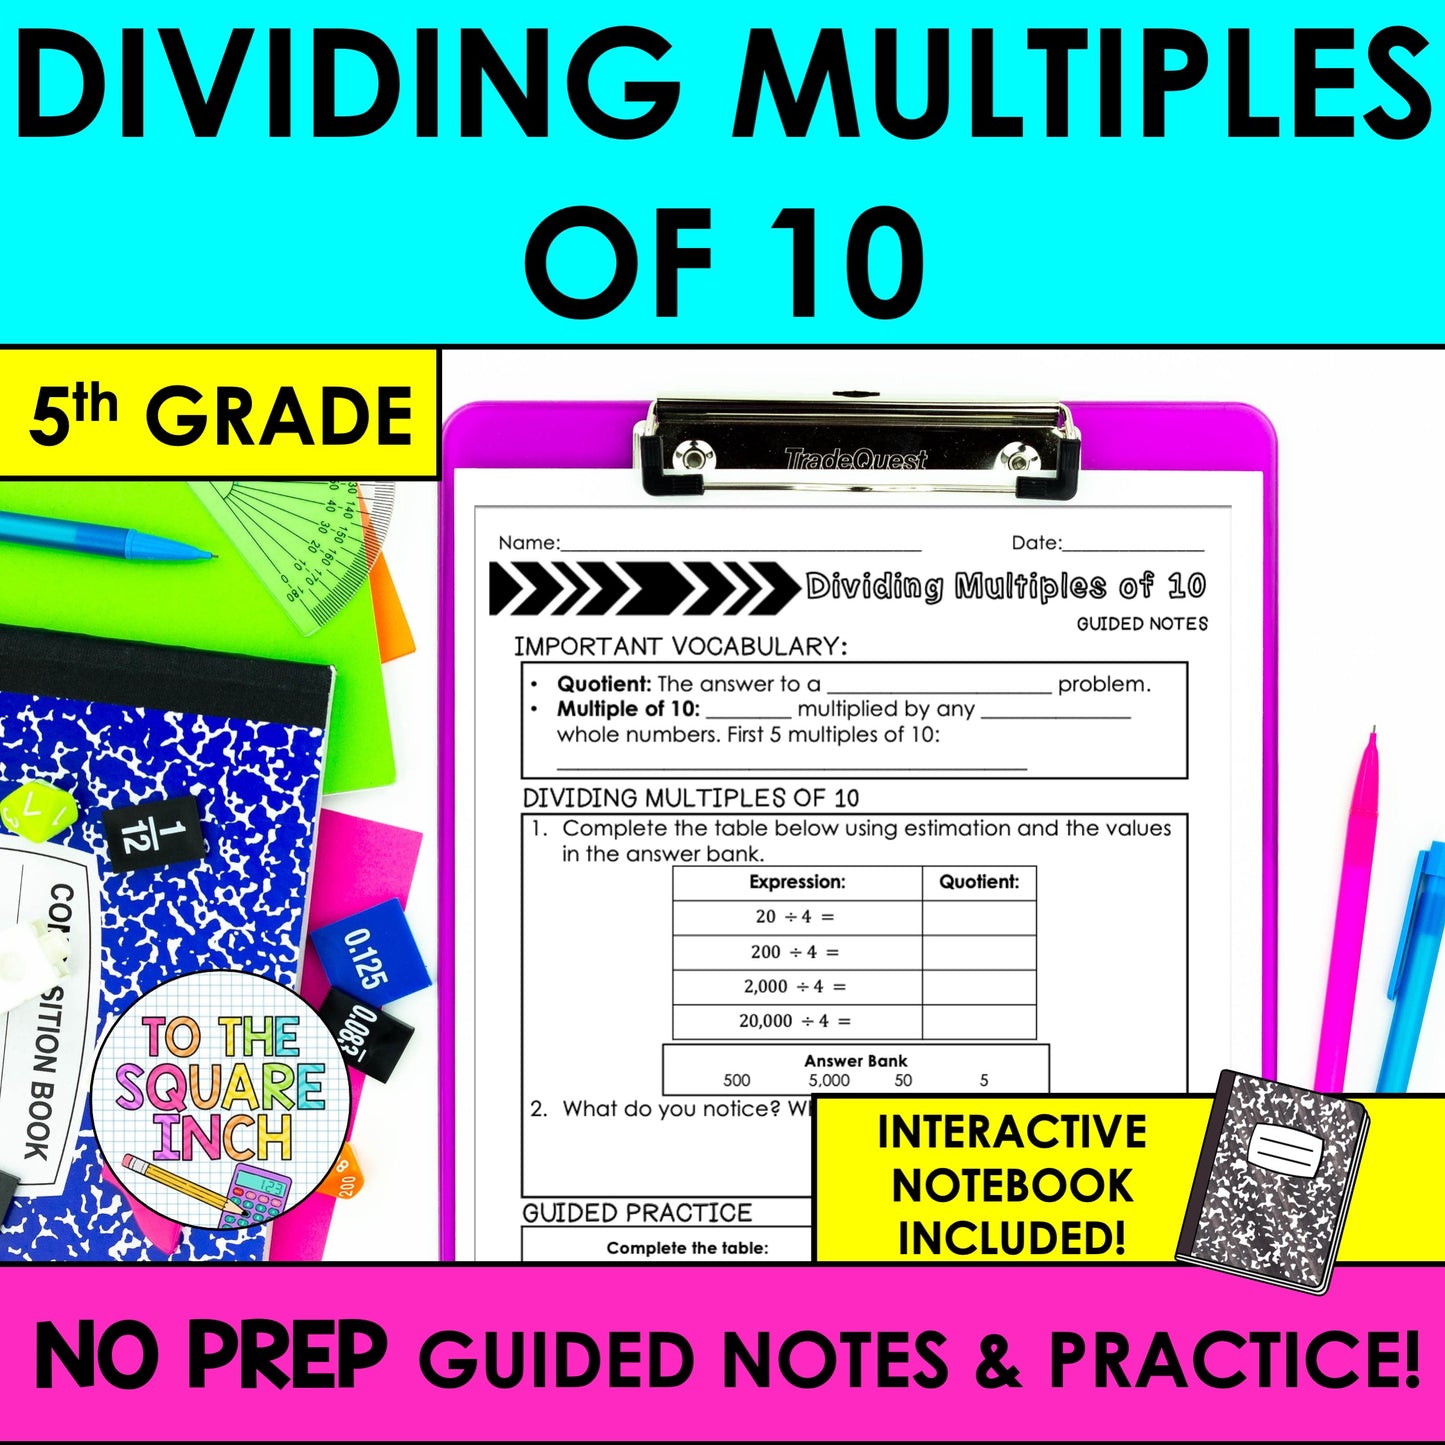 Dividing Multiples of 10 Notes